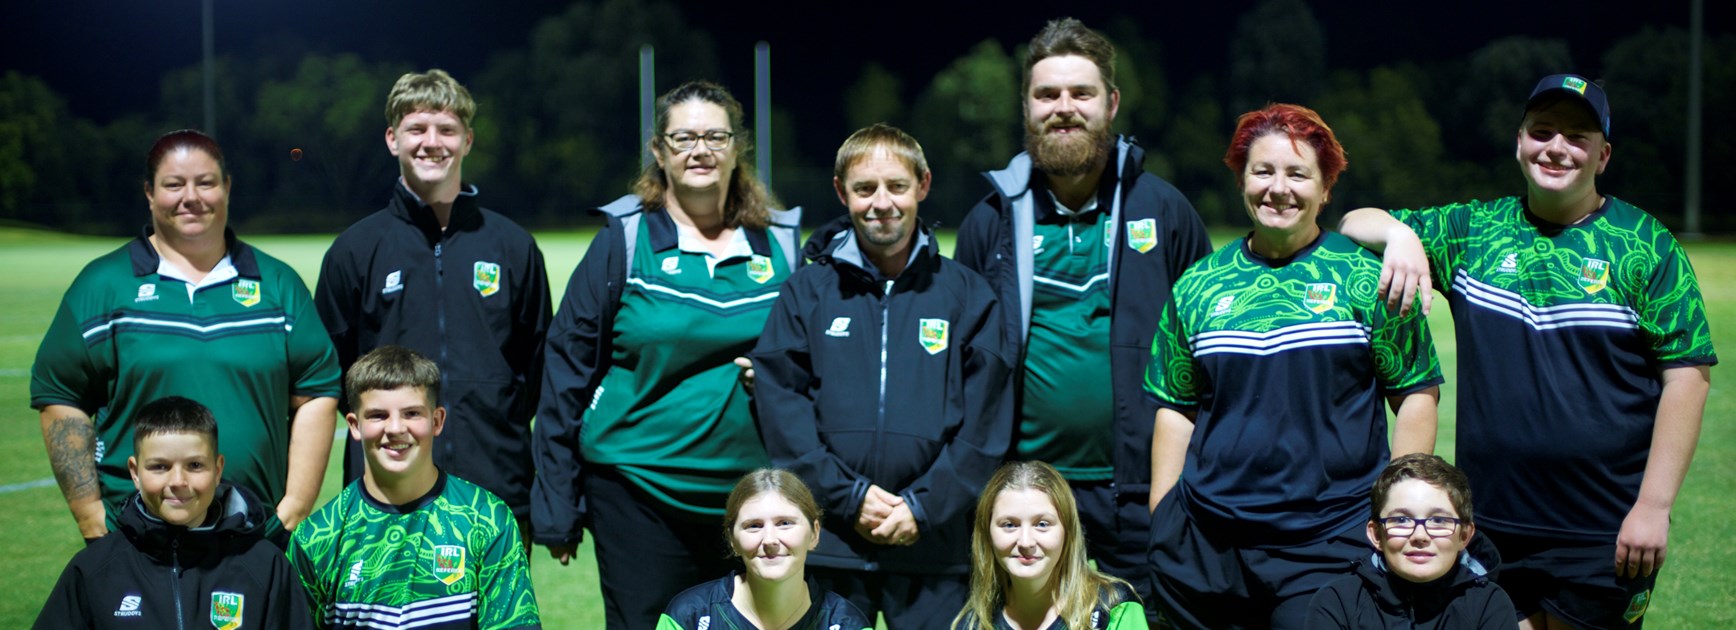 Mini Maroons: Kids step up to join Ipswich referee ranks